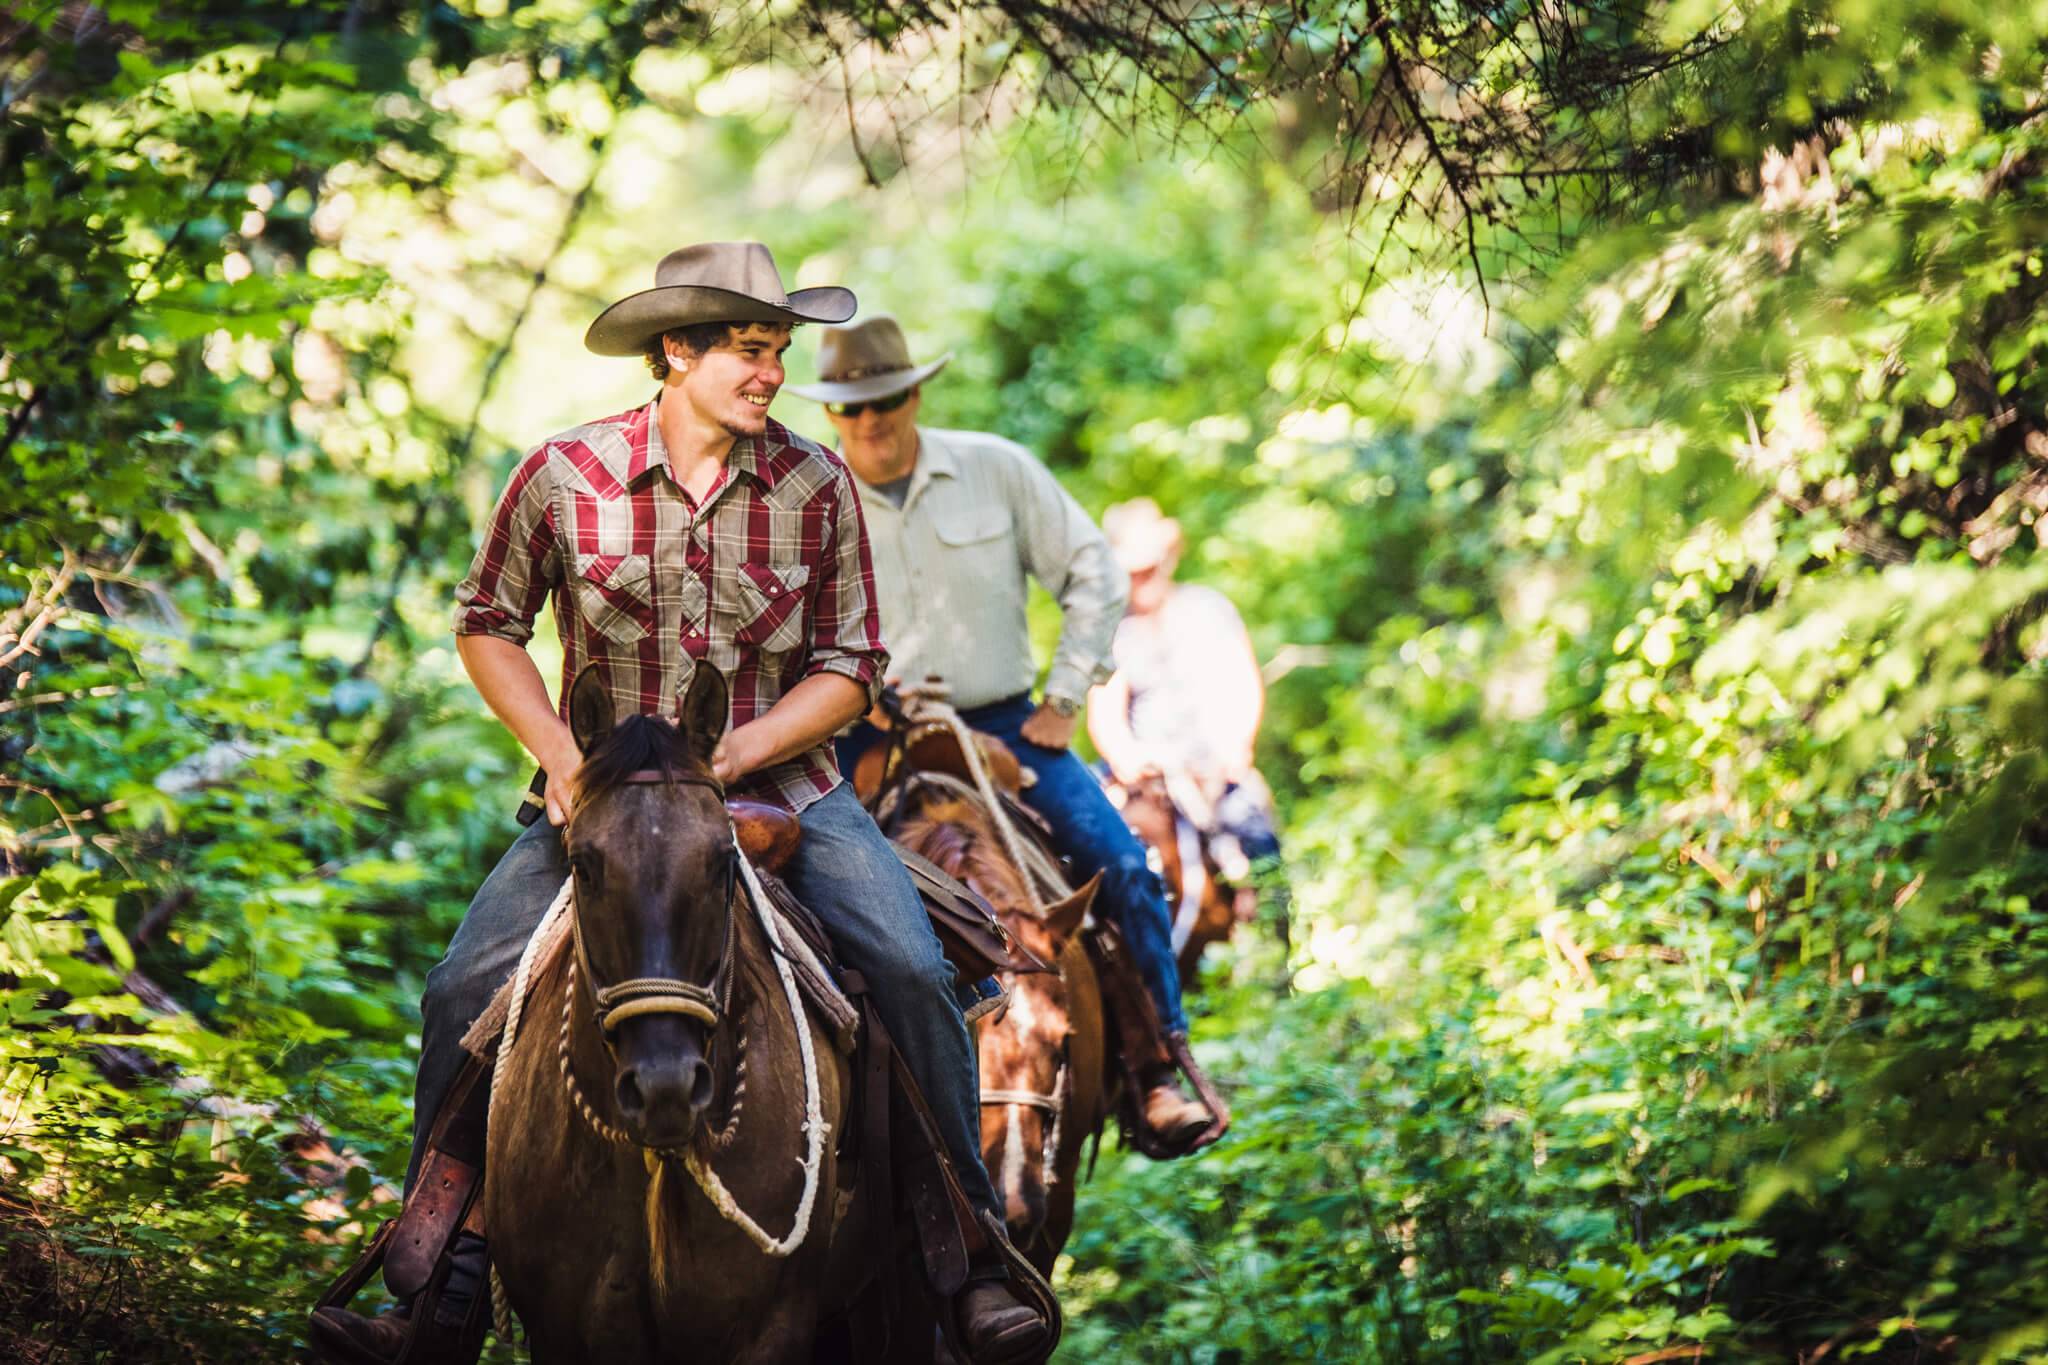 A group of people ride horses on a trail lined with trees.